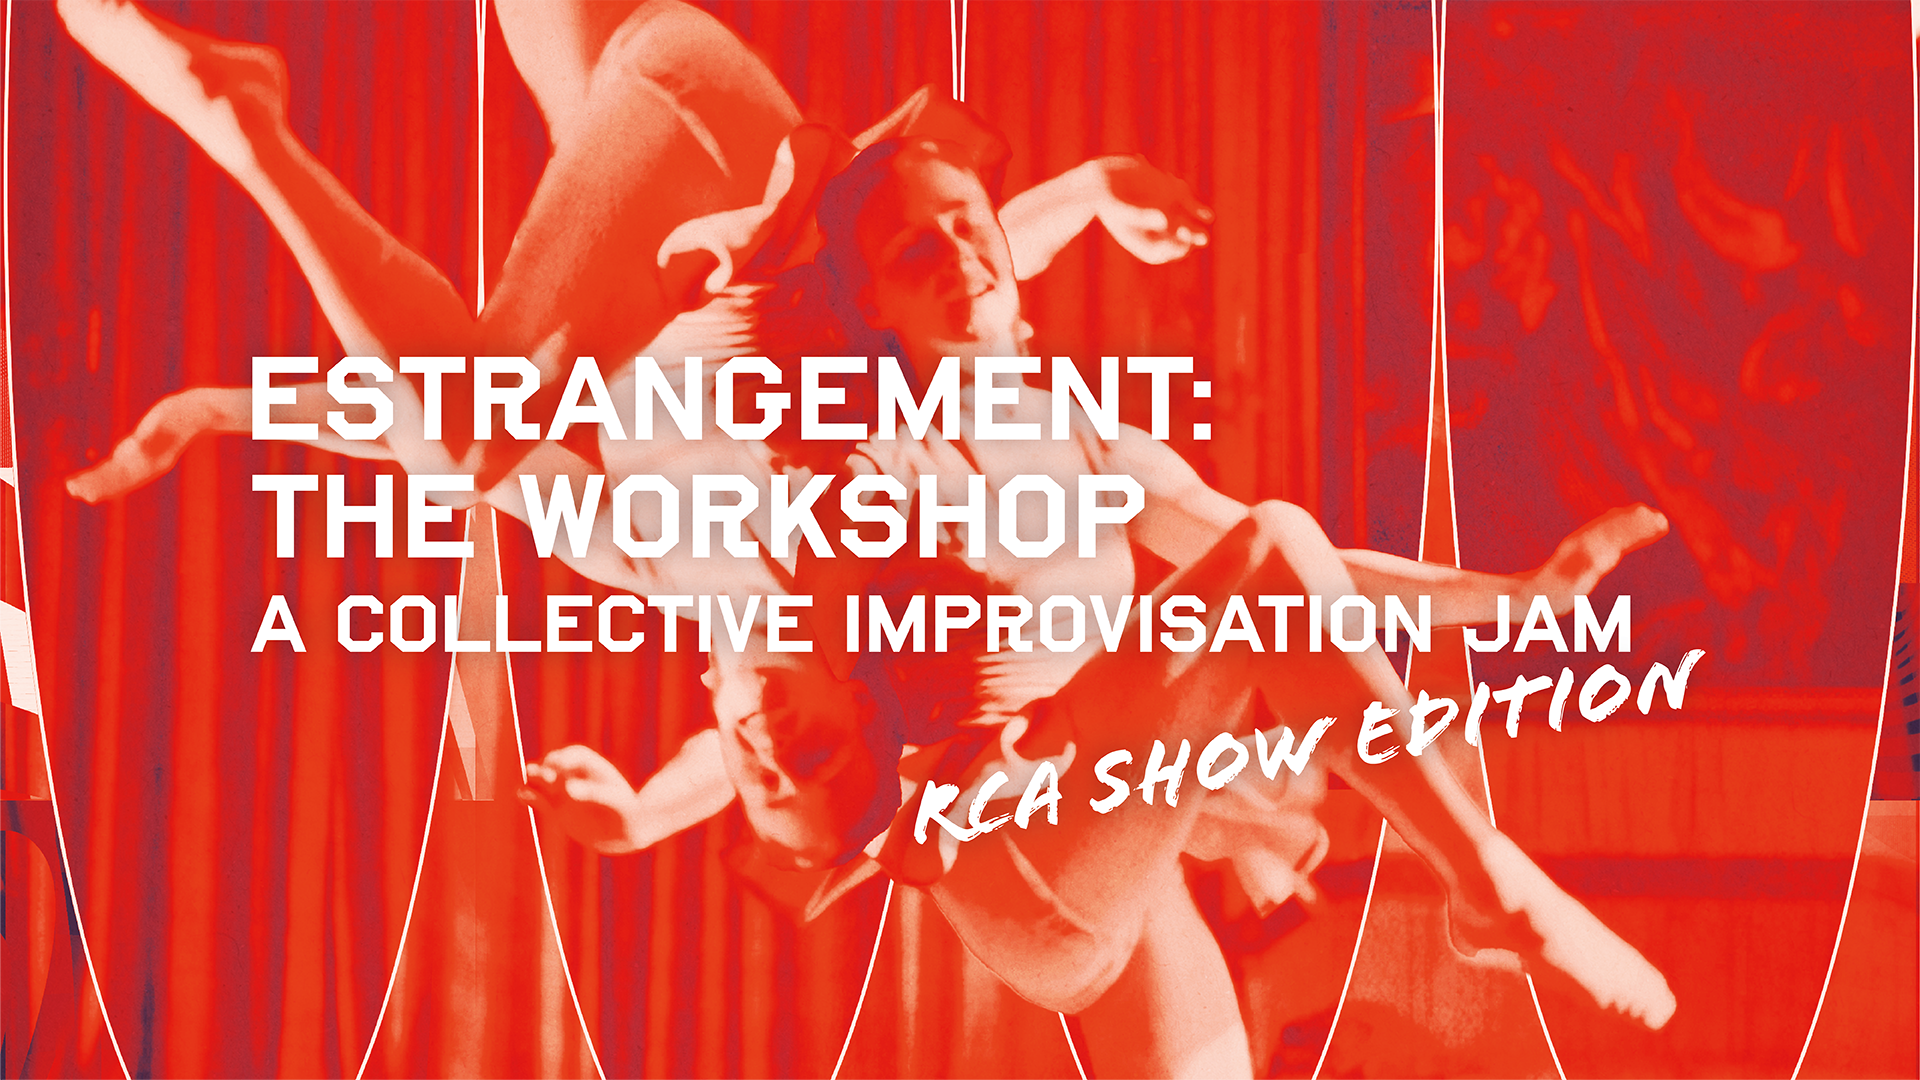 Image of white text reading ‘Estrangement: The Workshop. A collective improvisation jam’ over a red-tinted background image of two dancers and red curtains.